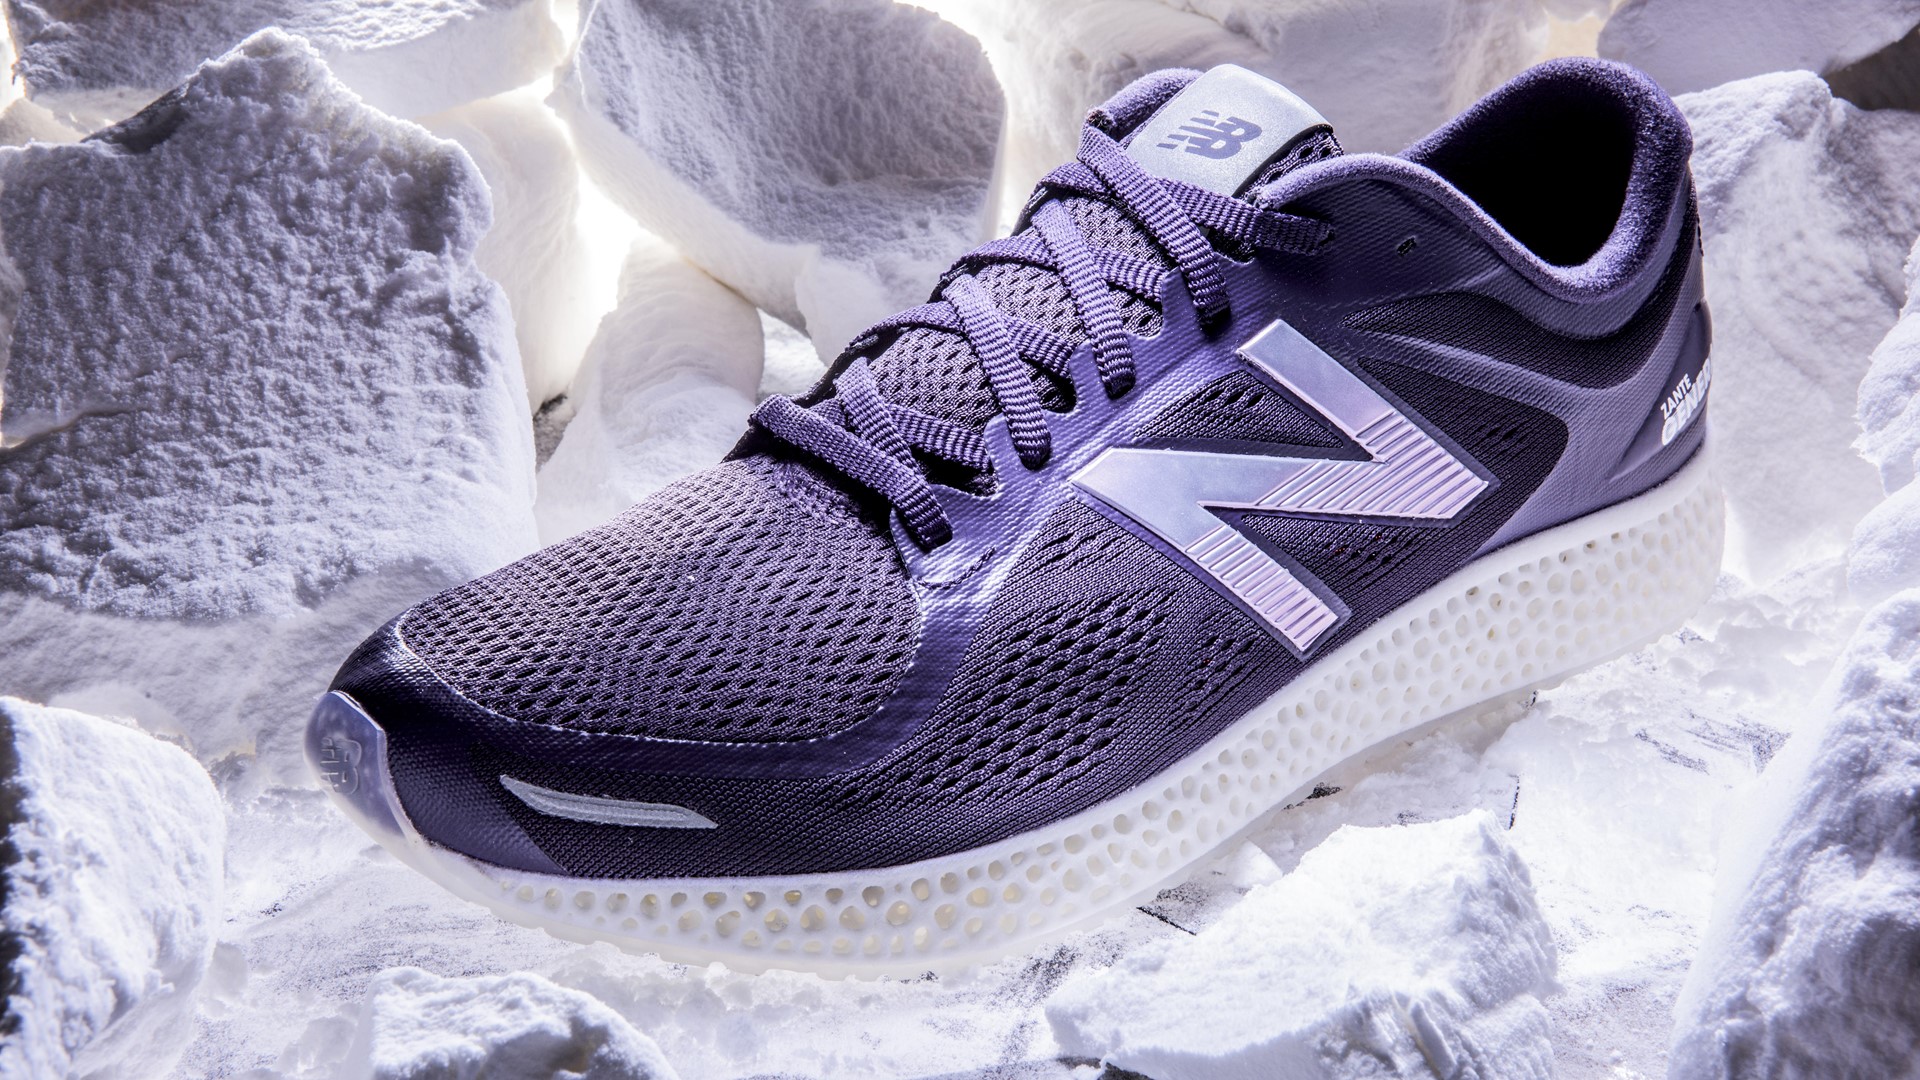 NEW BALANCE TO SELL FIRST 3D PRINTED RUNNING SHOE